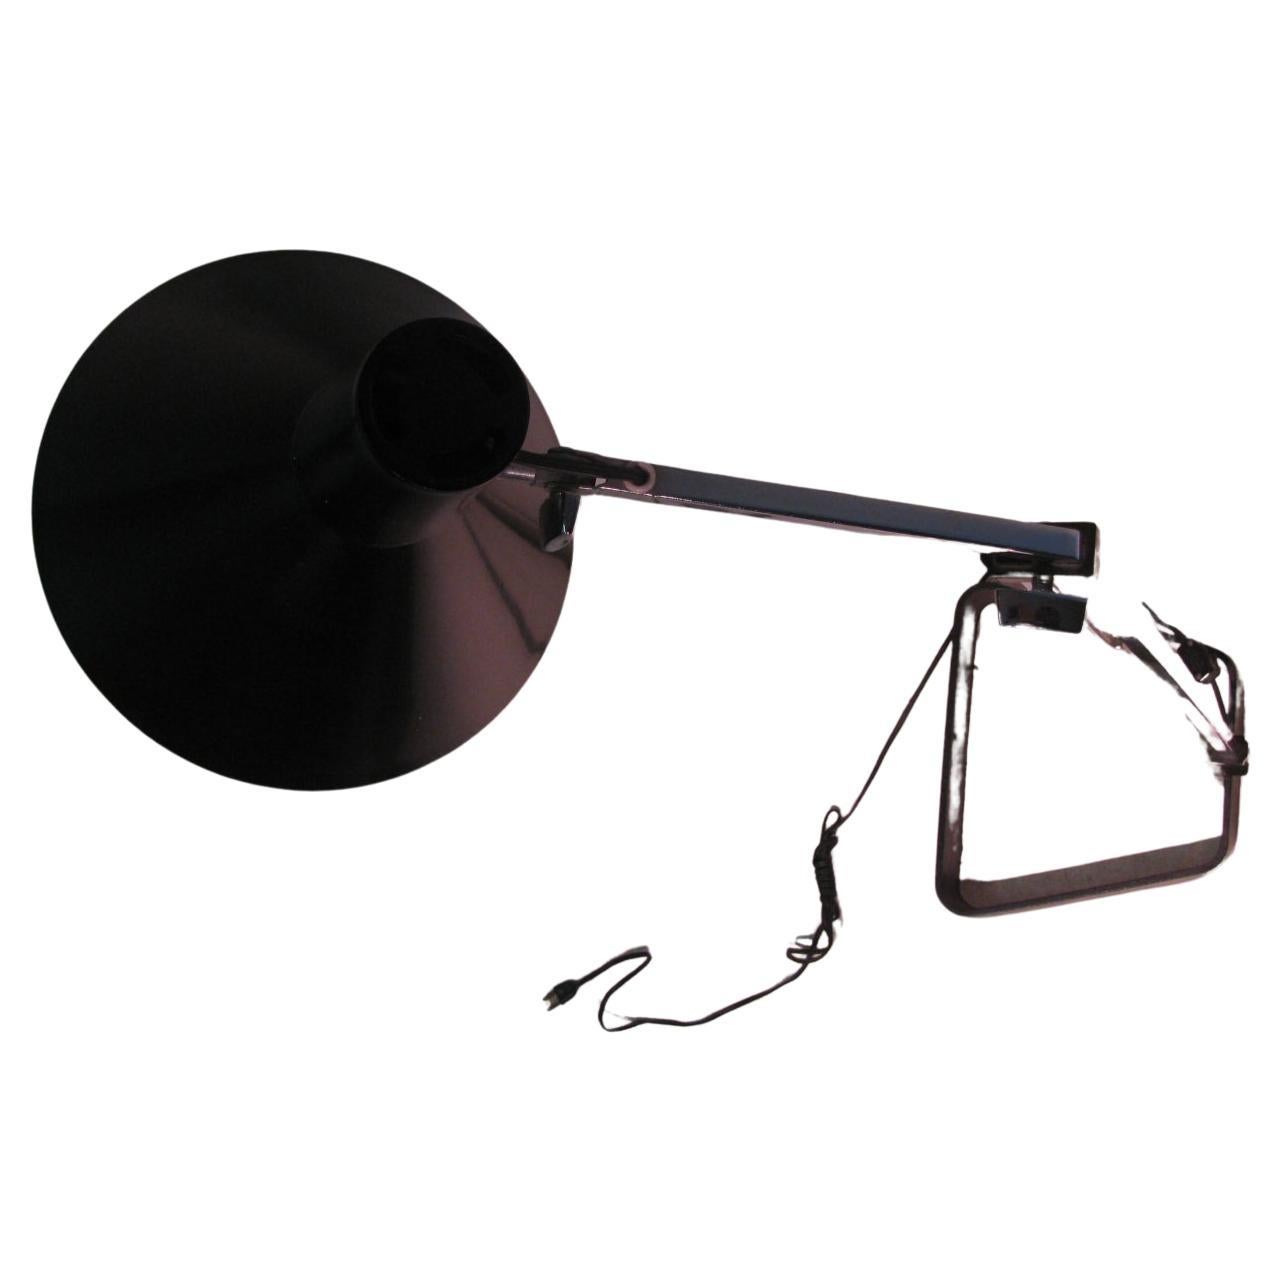 Elegant and simple design. Adjustable floor lamp created out of square chromed steel which rises to 57.5 and will lower to 39in. Black flared shade also is adjustable. Heavy steel base with a unique open design. Wiring is sound, takes a regular